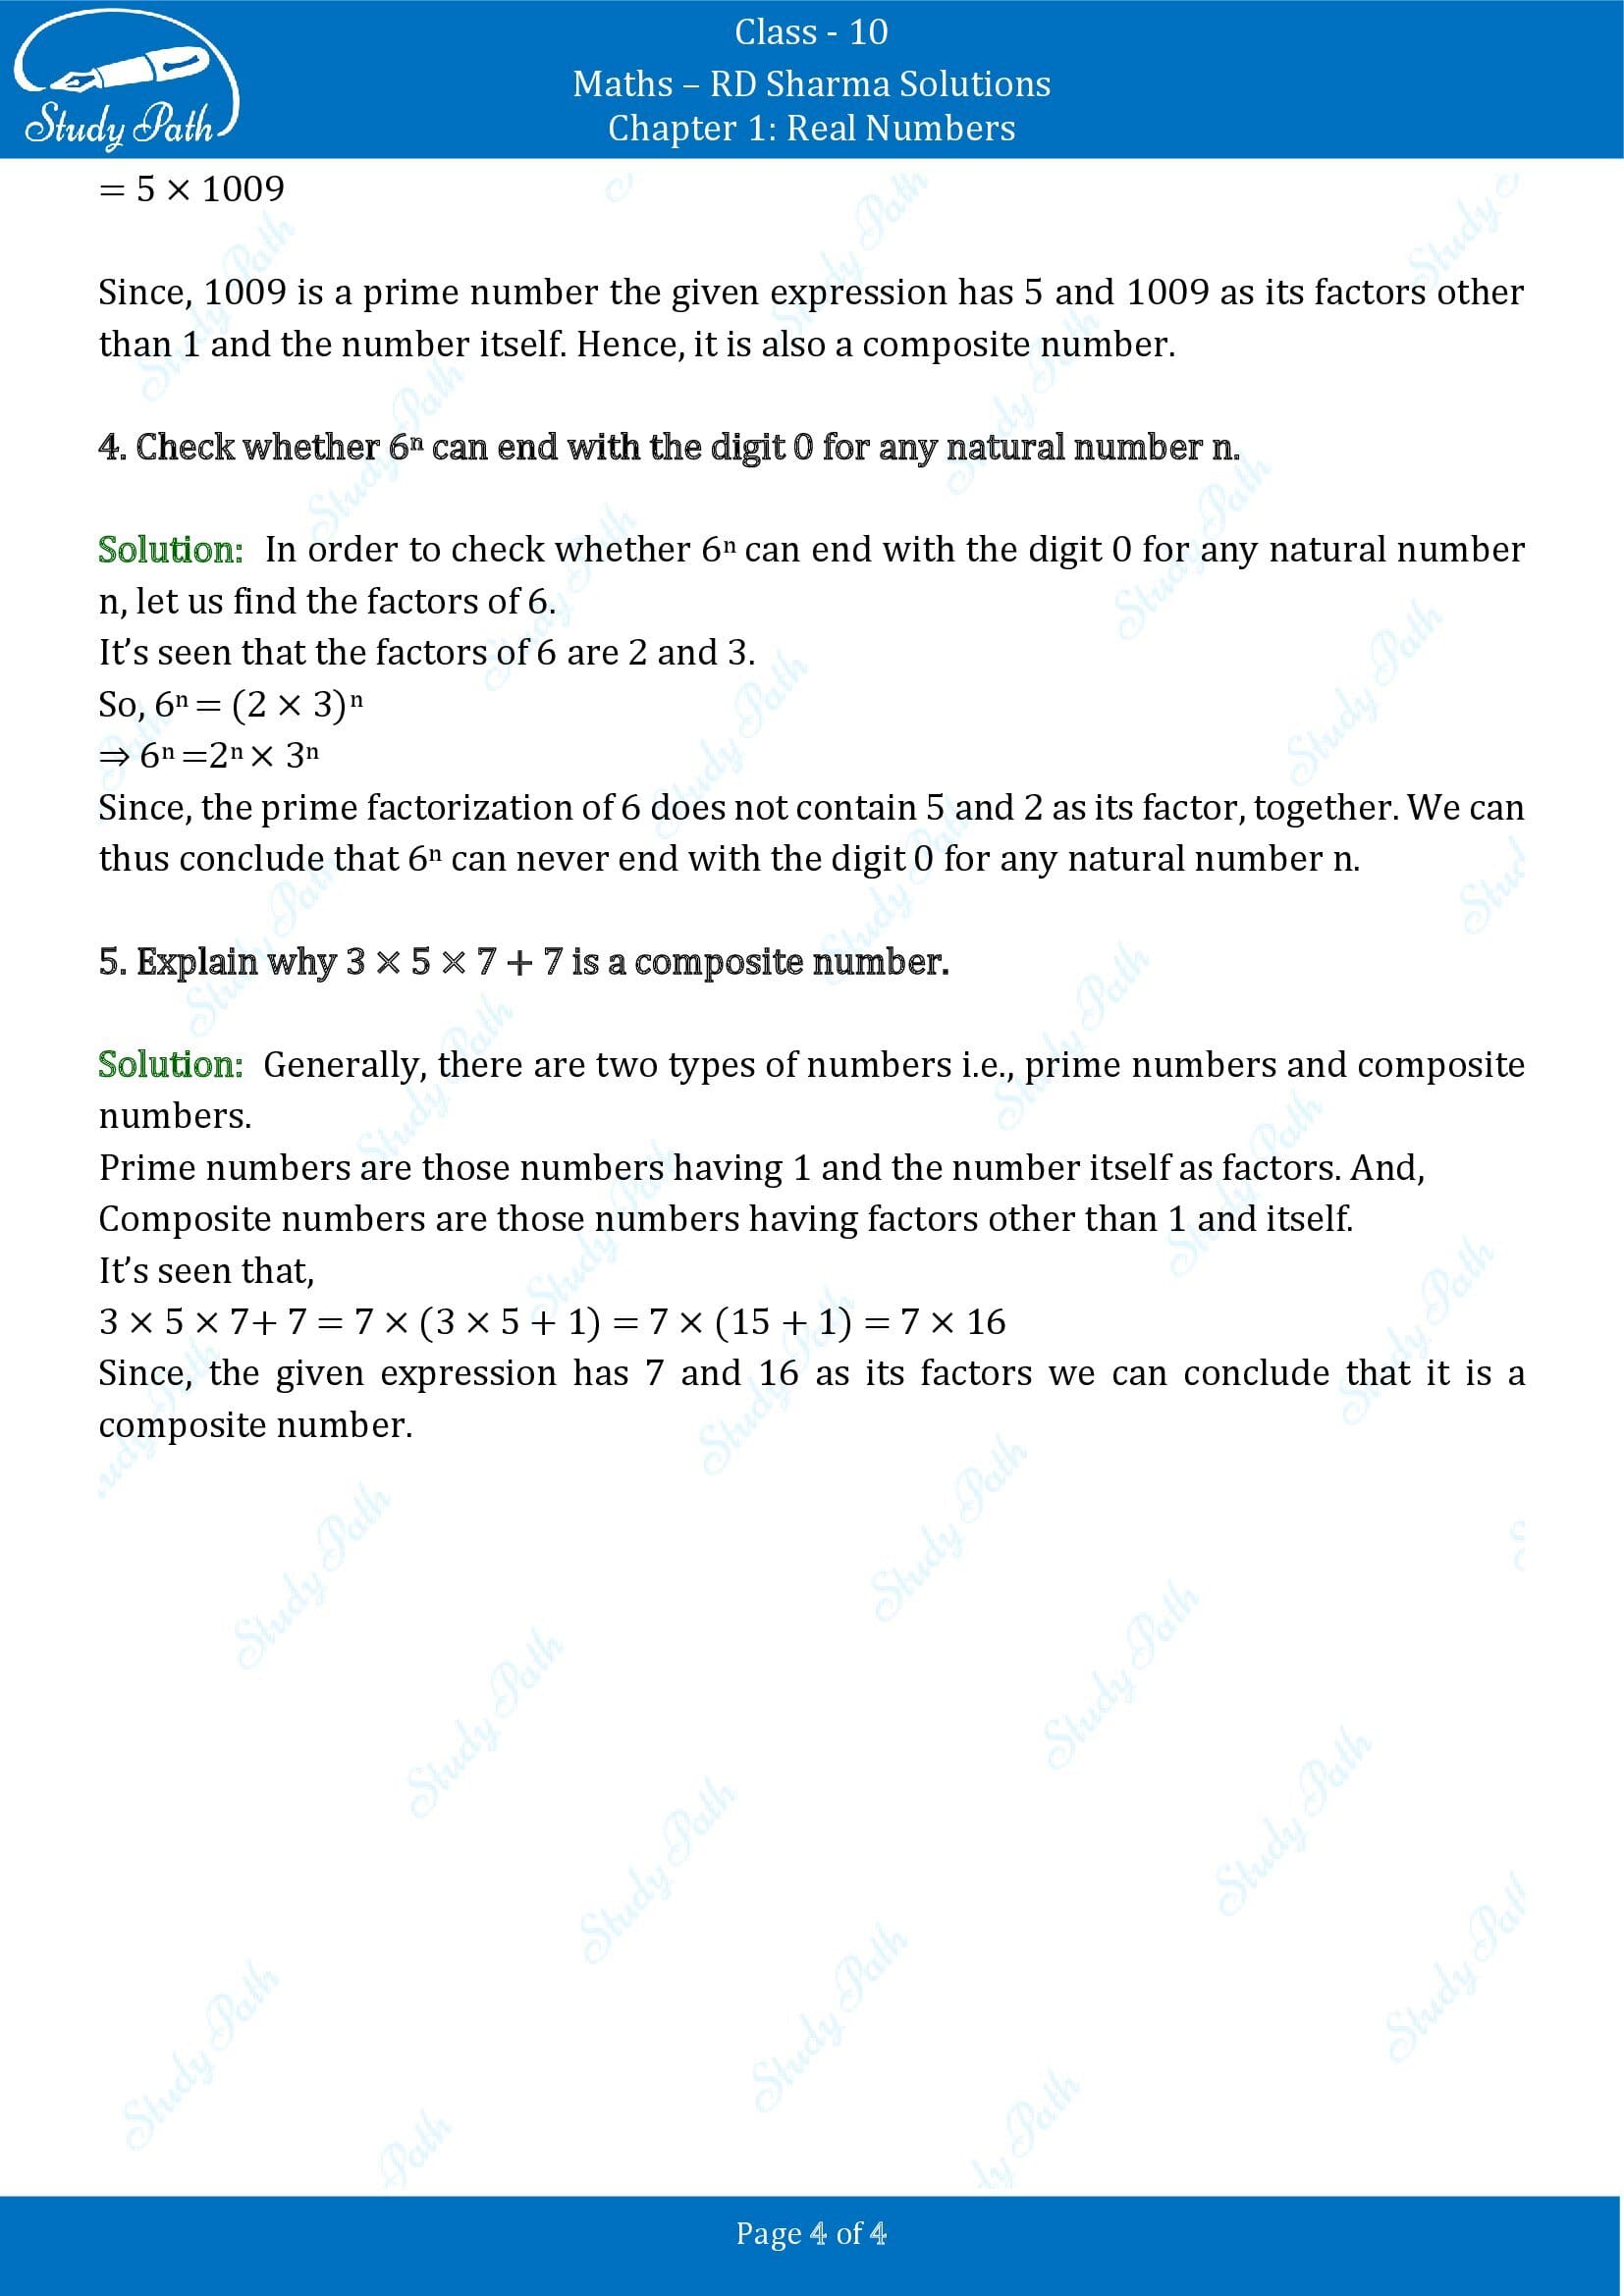 RD Sharma Solutions Class 10 Chapter 1 Real Numbers Exercise 1.3 00004